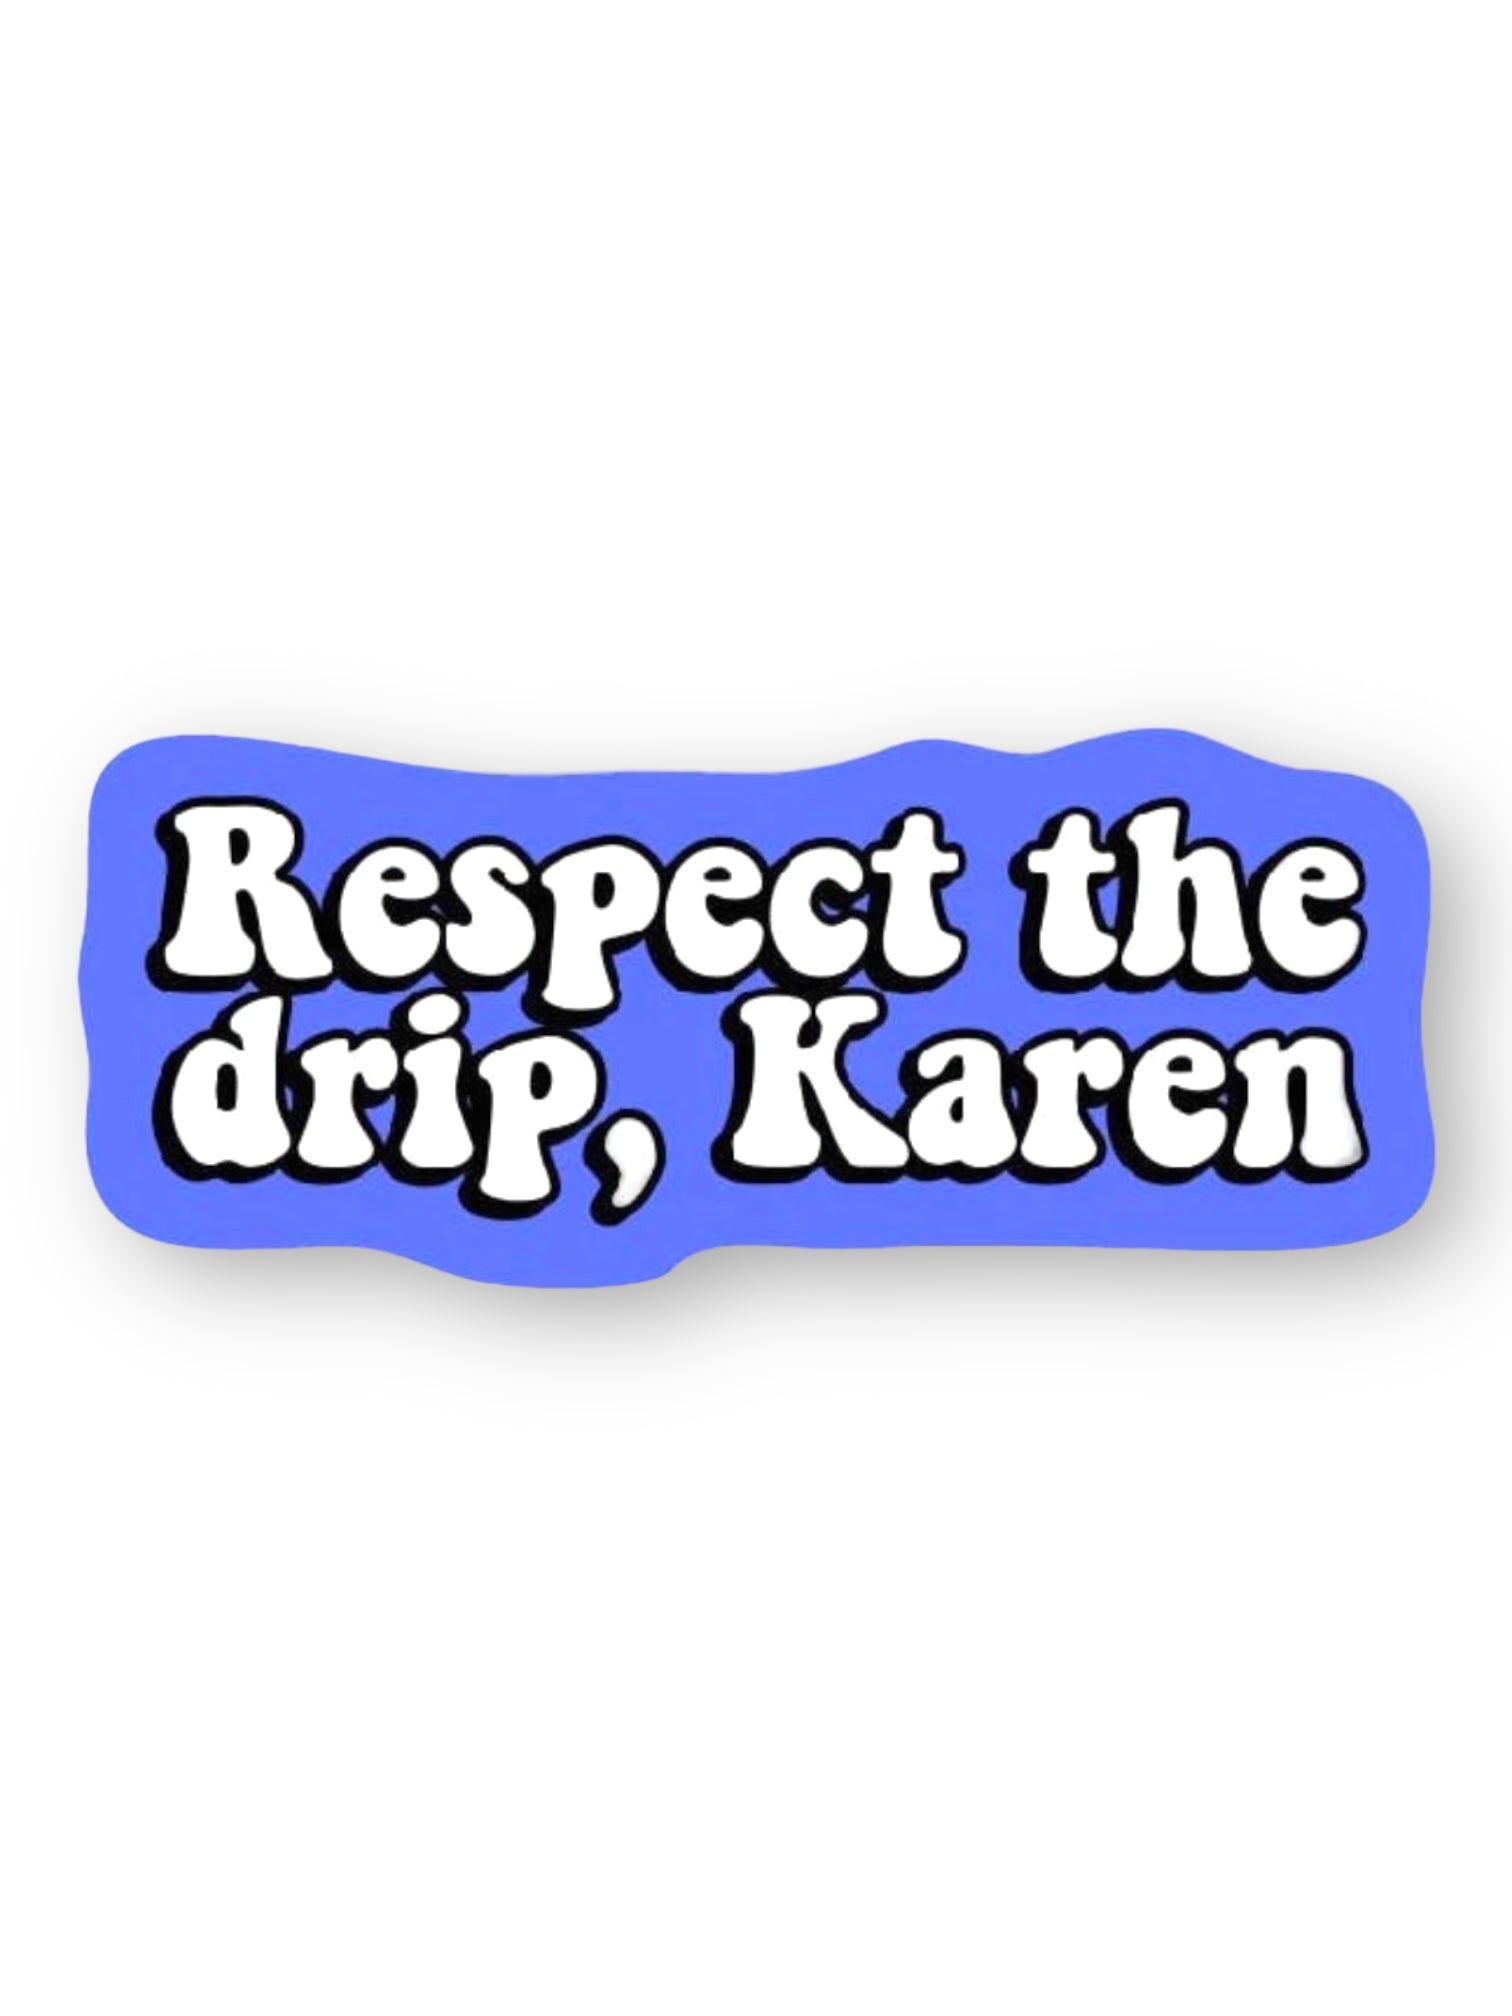 Respect the drip, Karen Sticker by Big Moods, Sold by Le Monkey House